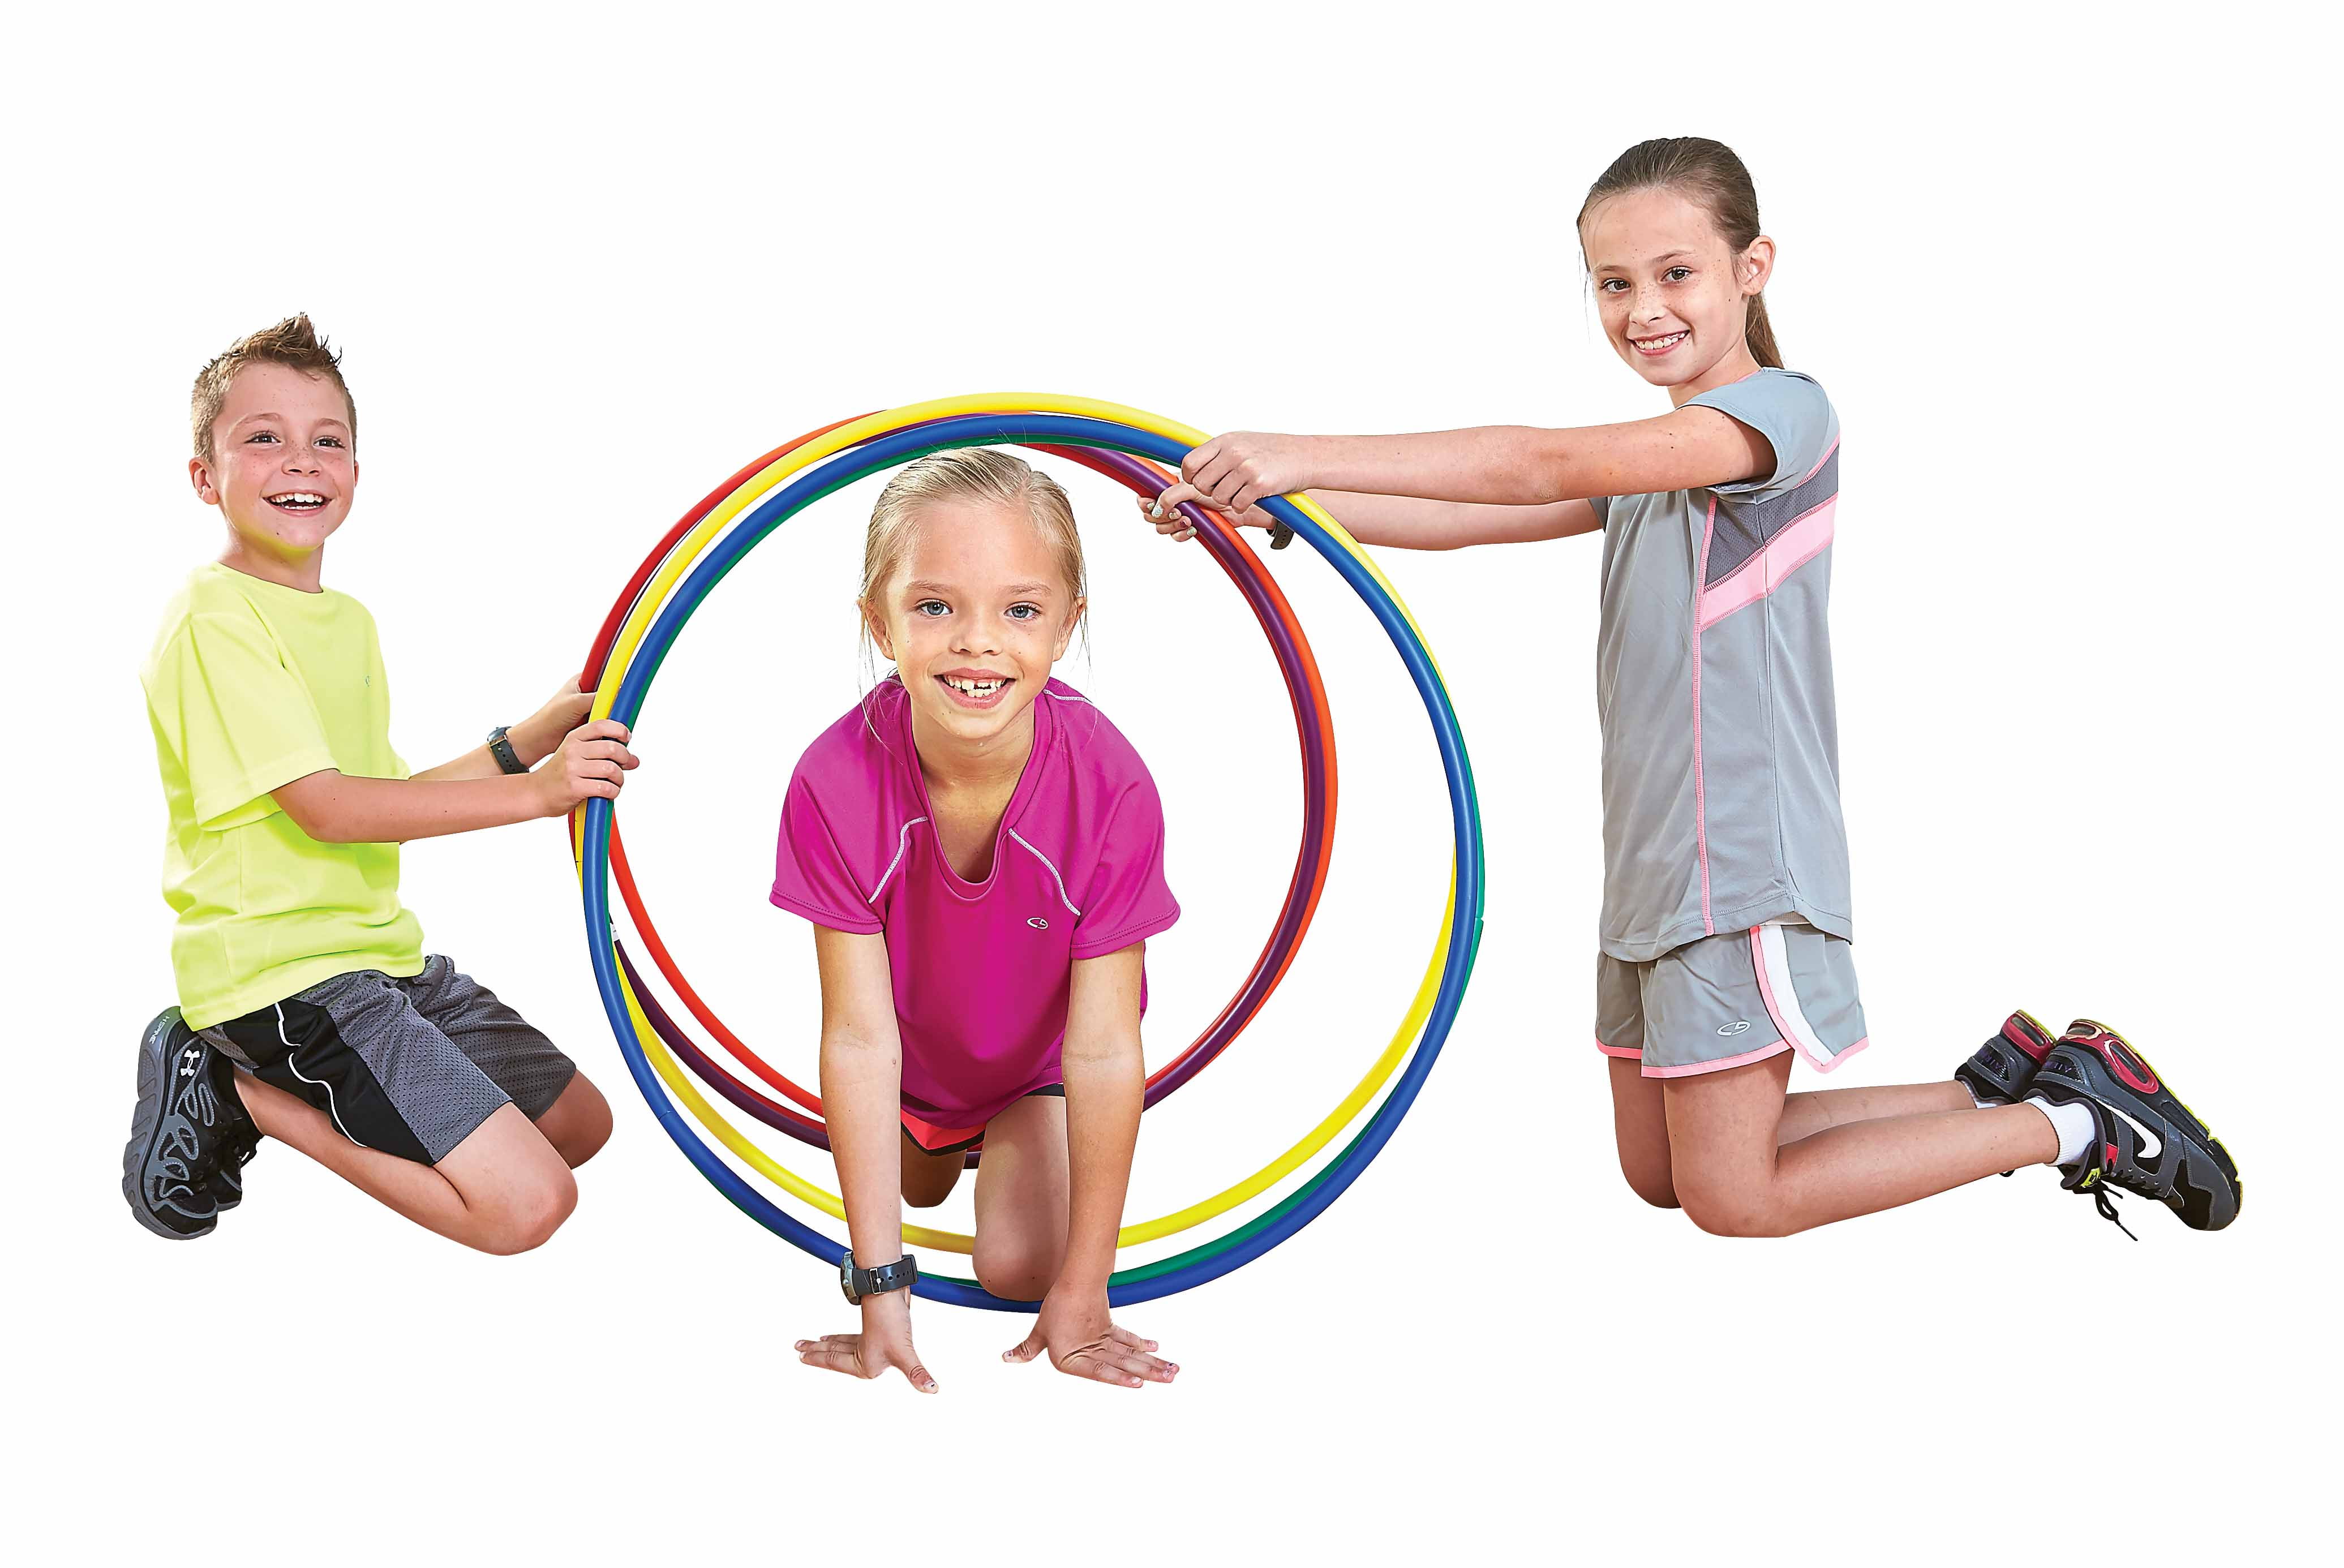  The Toyagator Hula Hoop for Kids - Detachable and Size  Adjustable Hoola Hoop Pink & Blue (Pack of 1) - Fitness Hoola Hoops Kids  Toy for Small Kids and Adolescence 